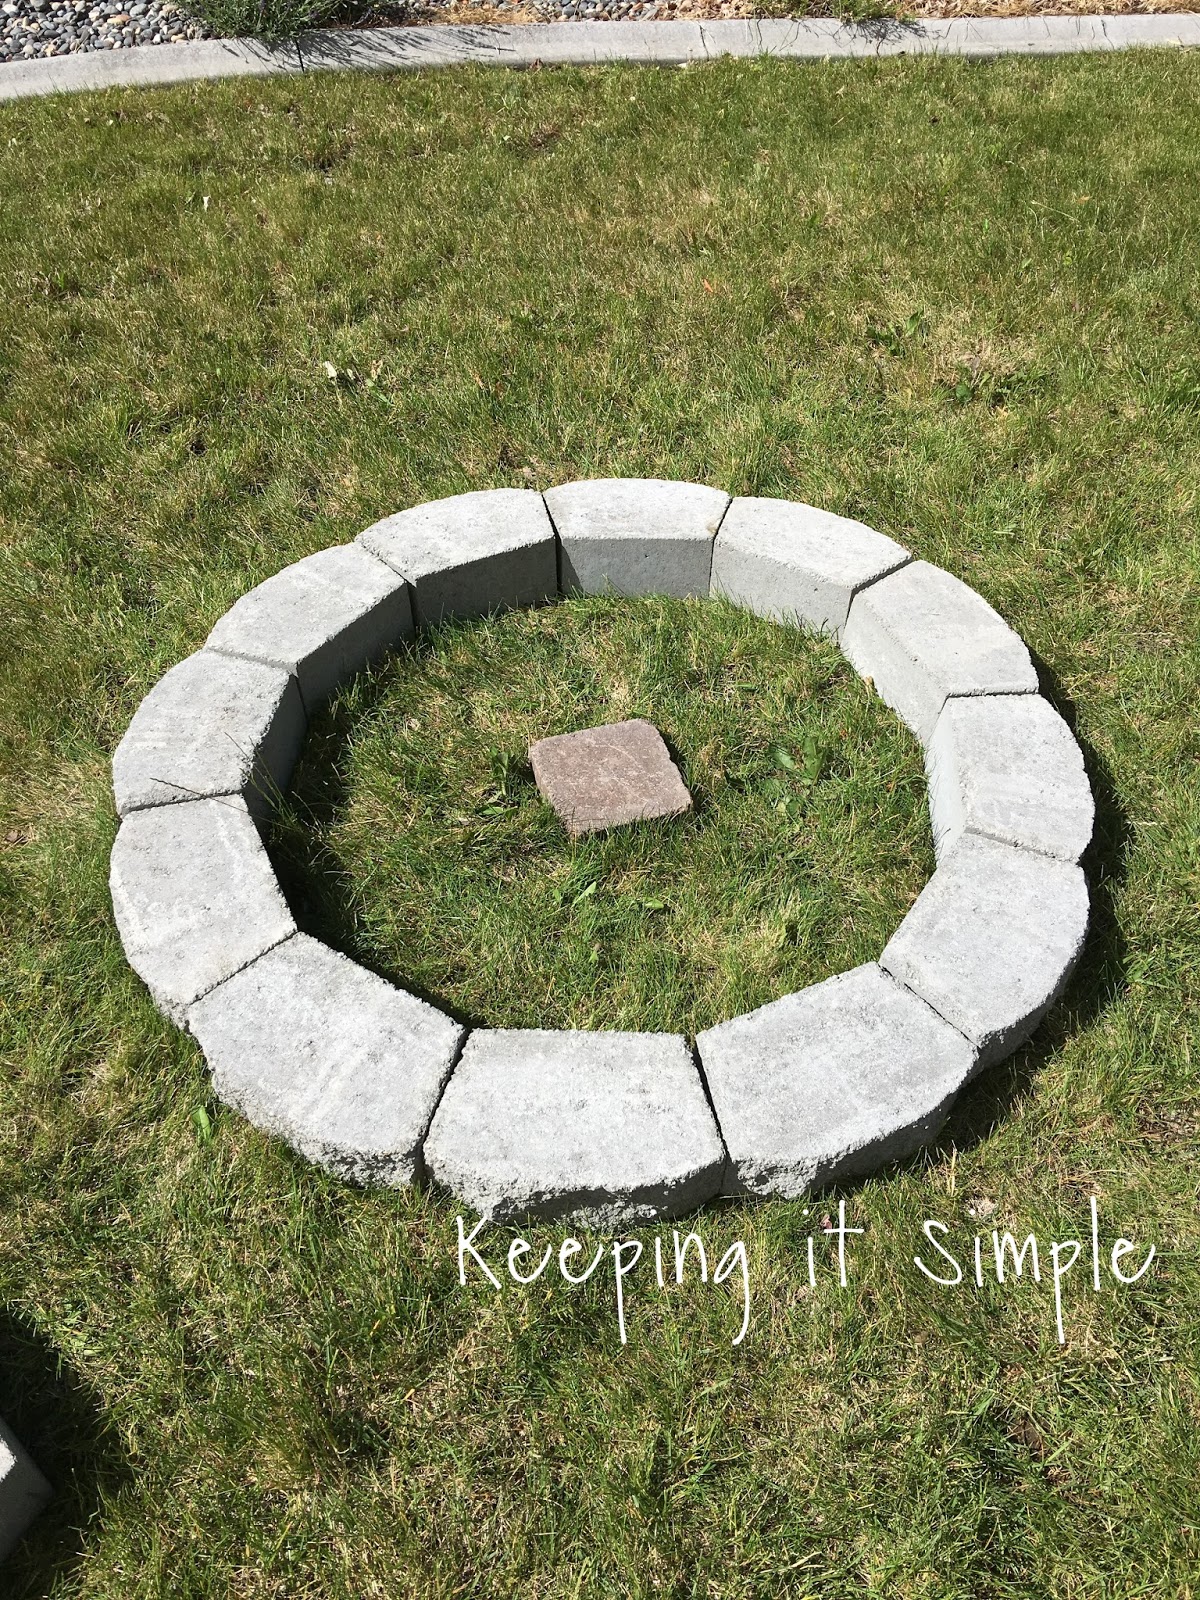 Build A Diy Fire Pit For Only 60, How To Lay Pavers For Fire Pit